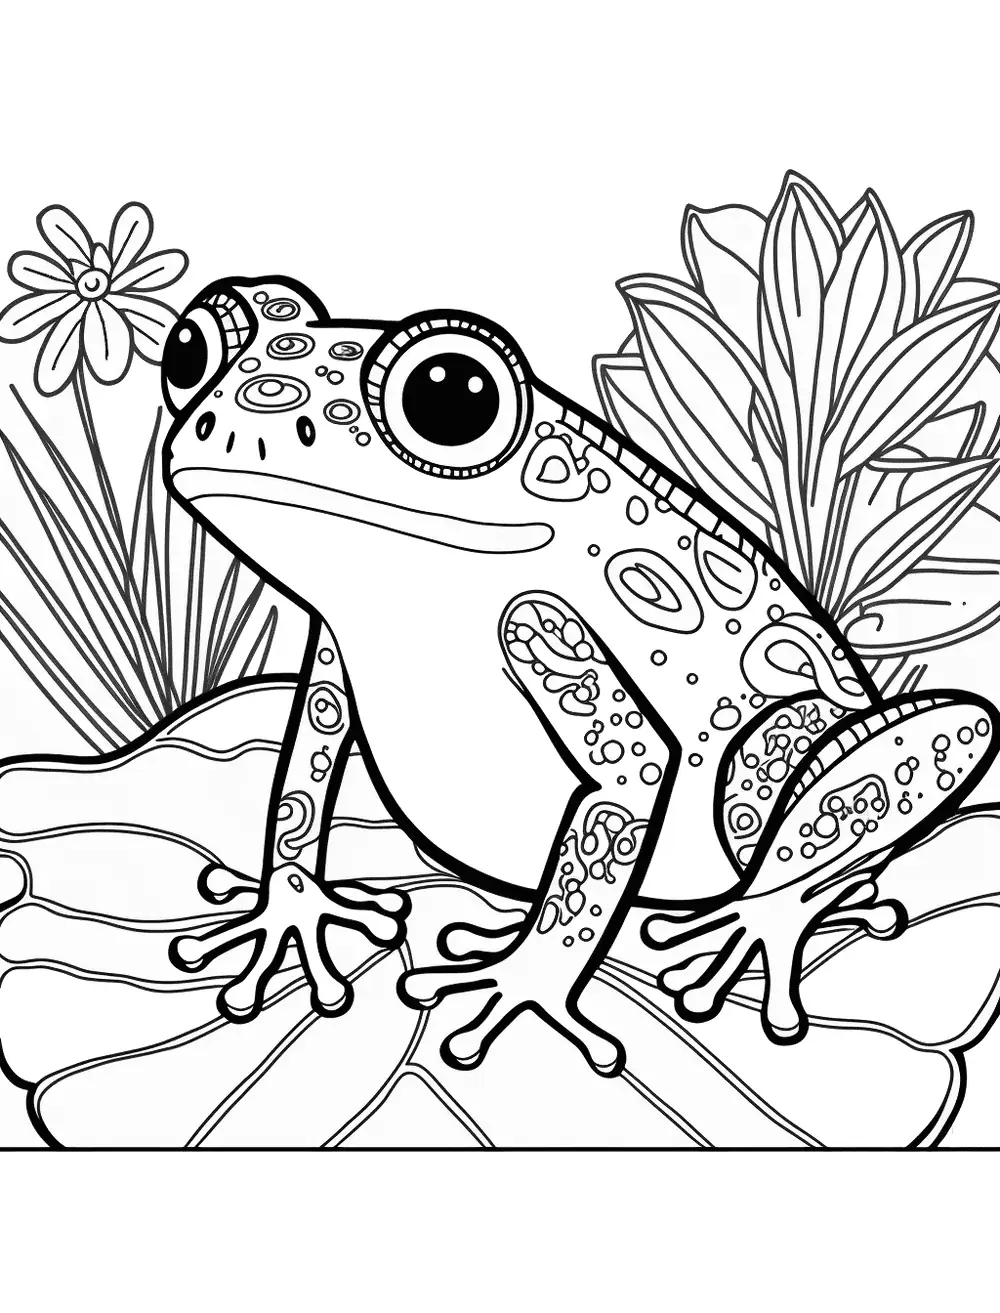 Red-eyed Frog Coloring Page - A frog with bright red eyes, surrounded by leaves and flowers.